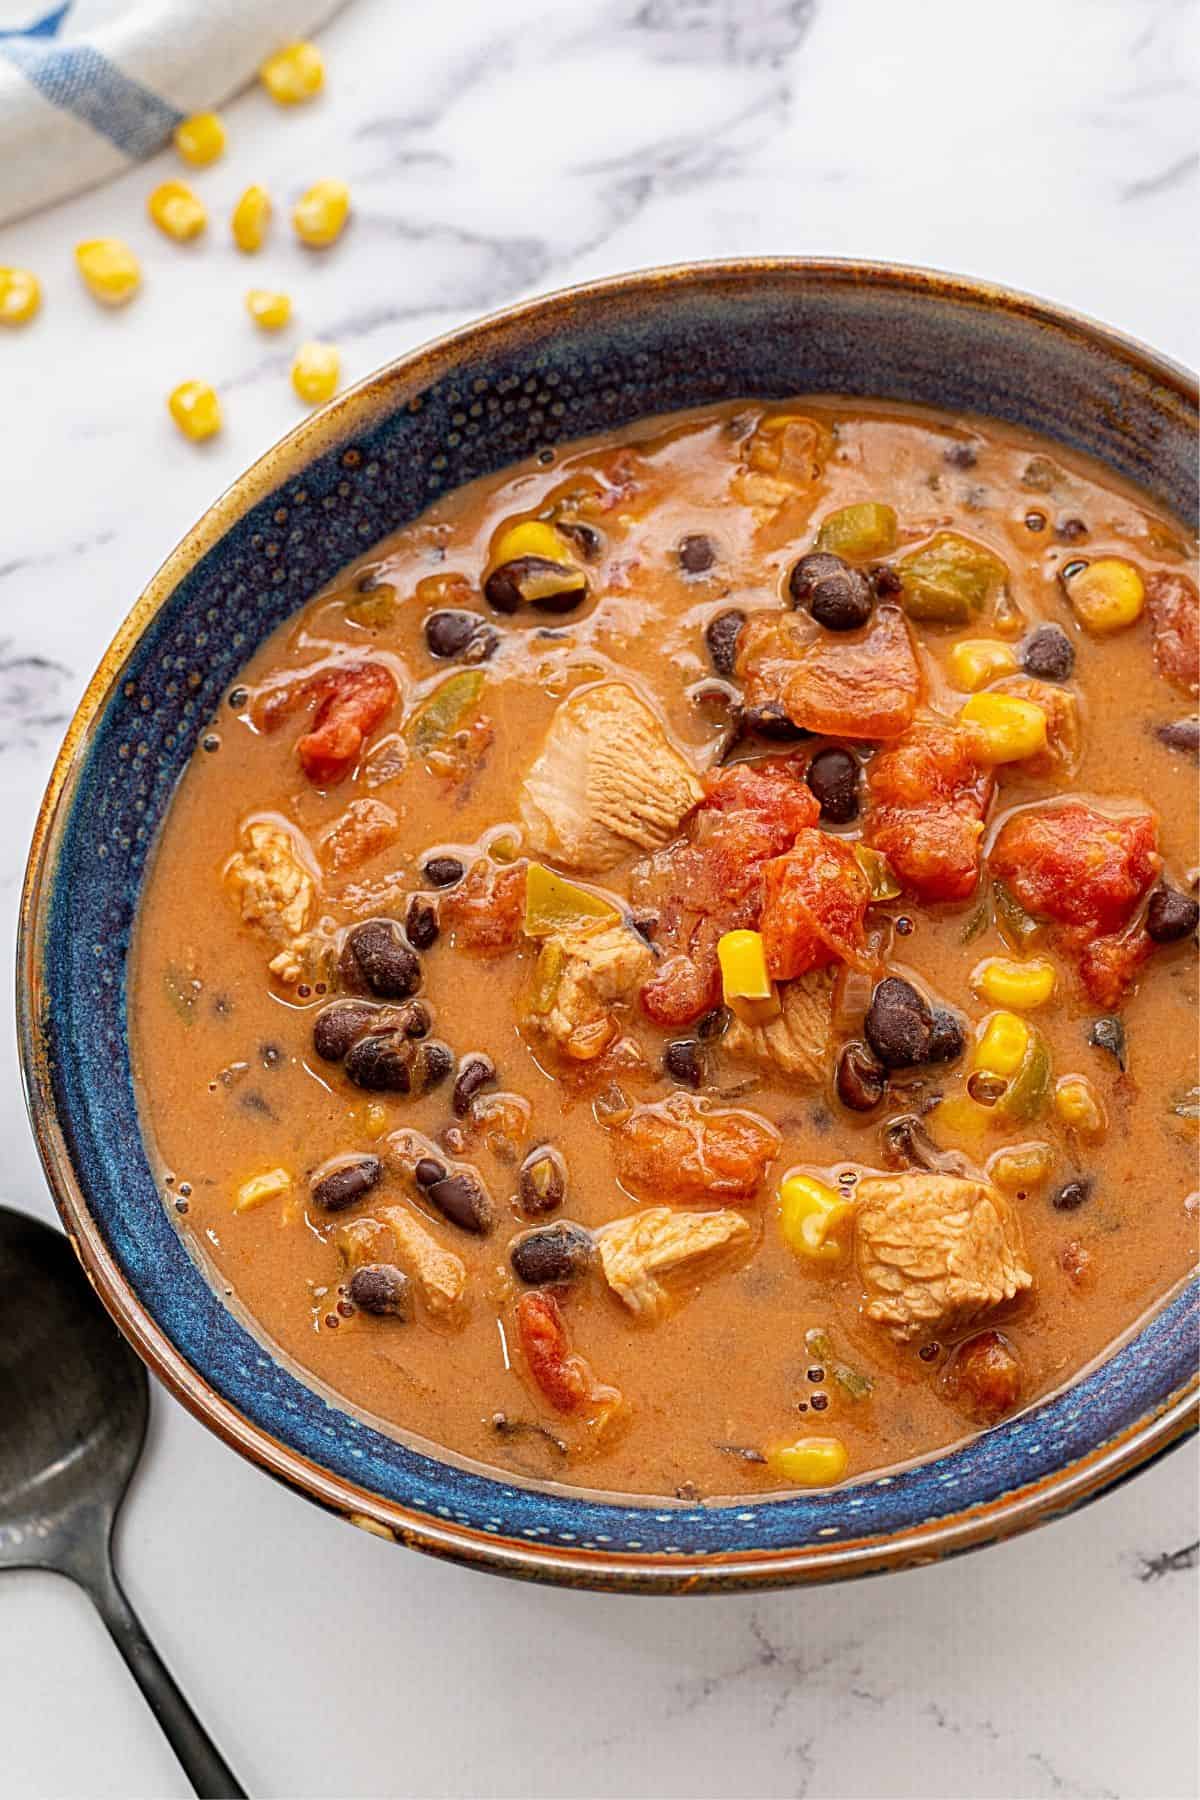 Bowl filled with a creamy soup with chunks of leftover chicken or turkey, corn, and black beans.